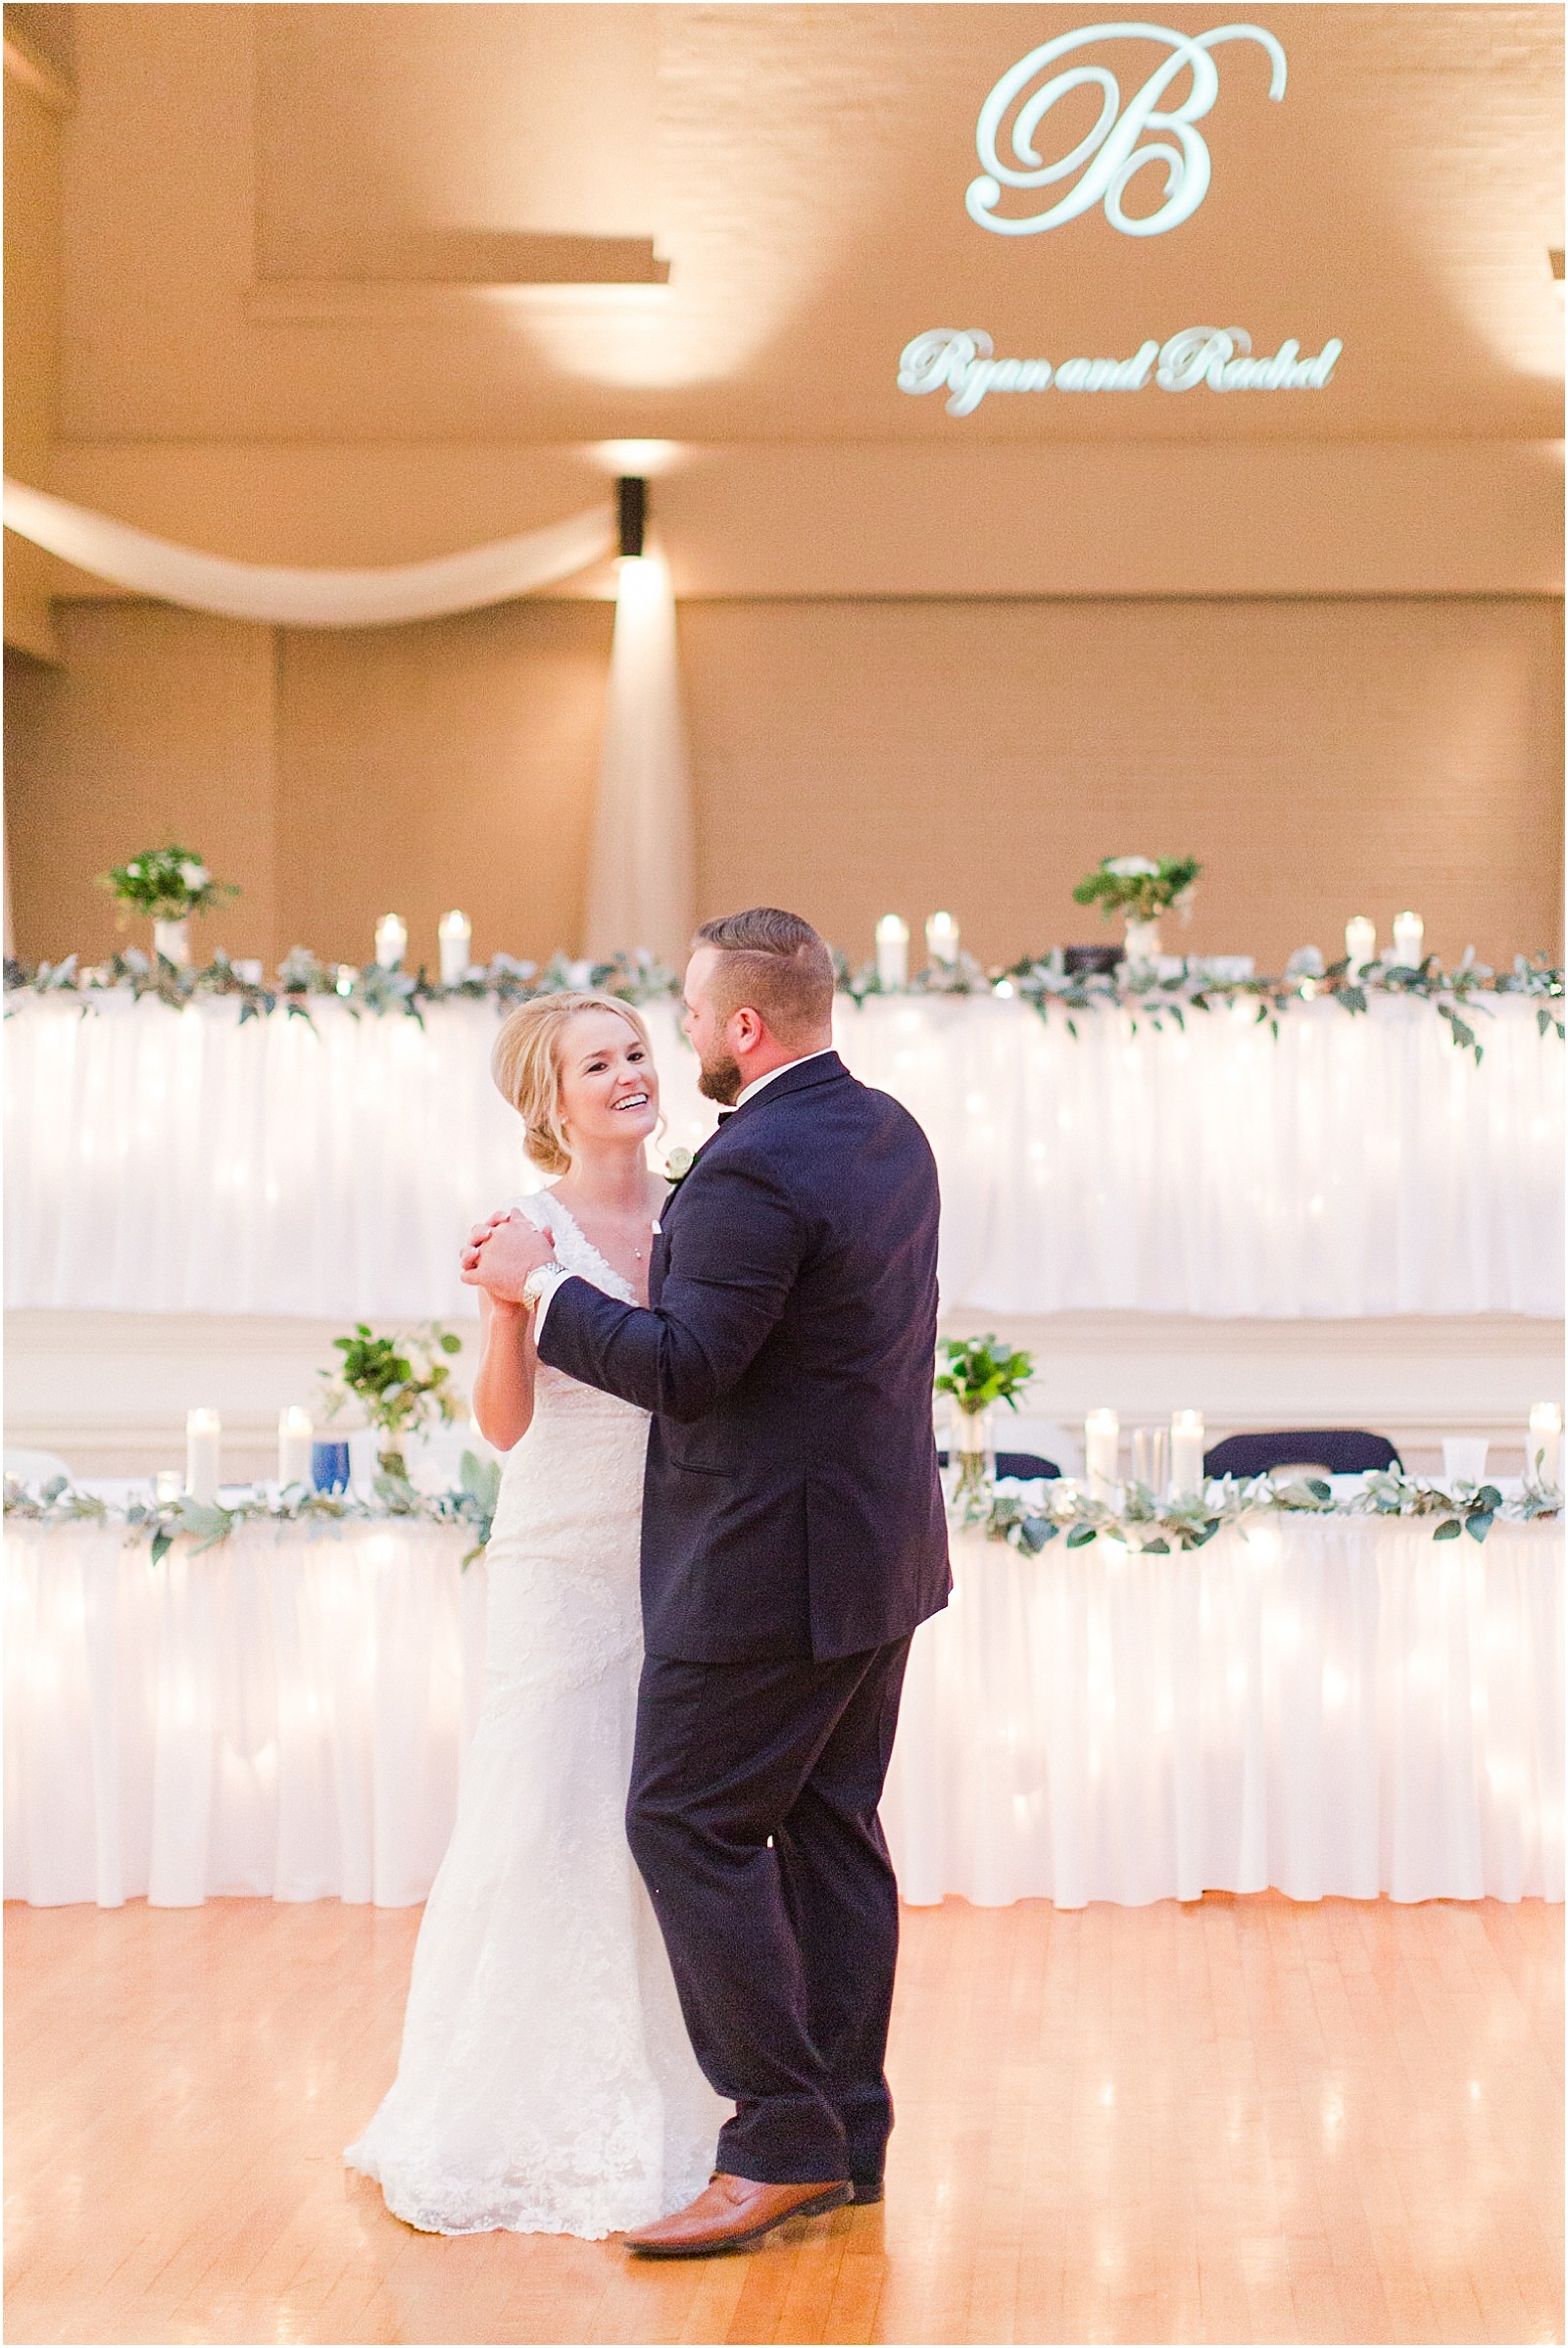 A Classic Winter Wedding in New Harmony | Rachel and Ryan | Bret and Brandie Photography 0131.jpg